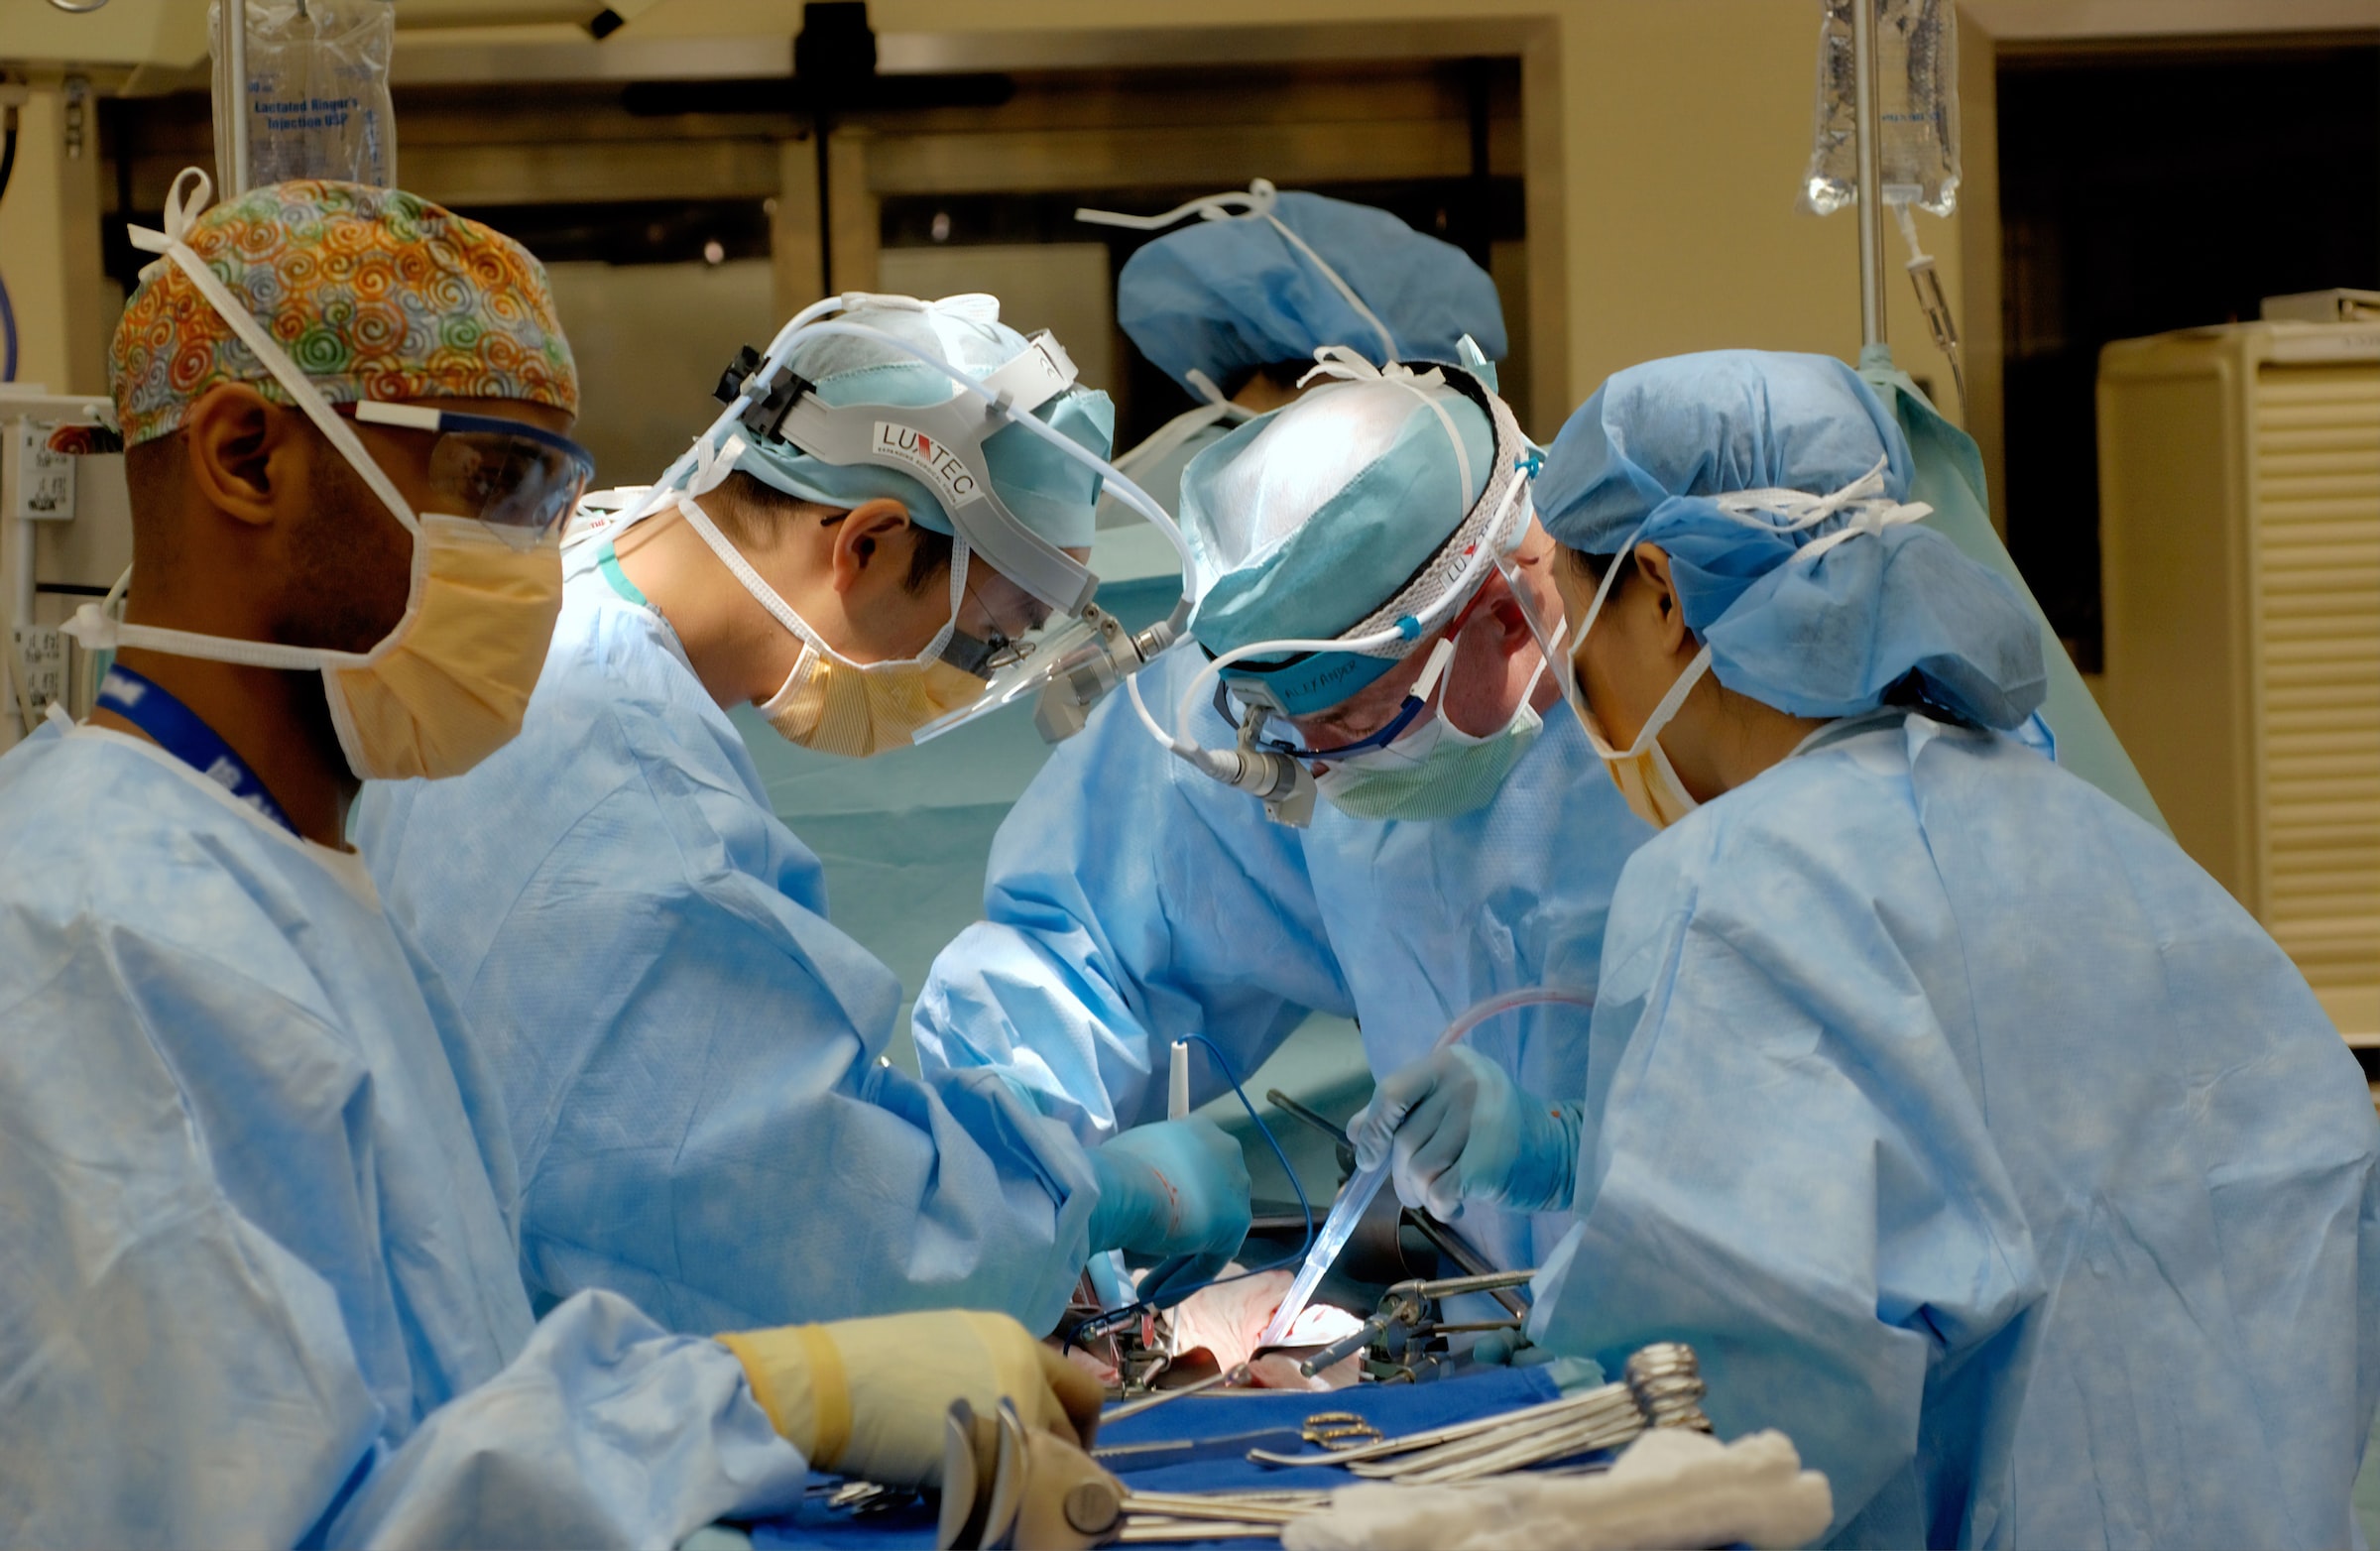 A team of five surgeons during an operation in an operating theatre, wearing blue gowns, gloves and PPE